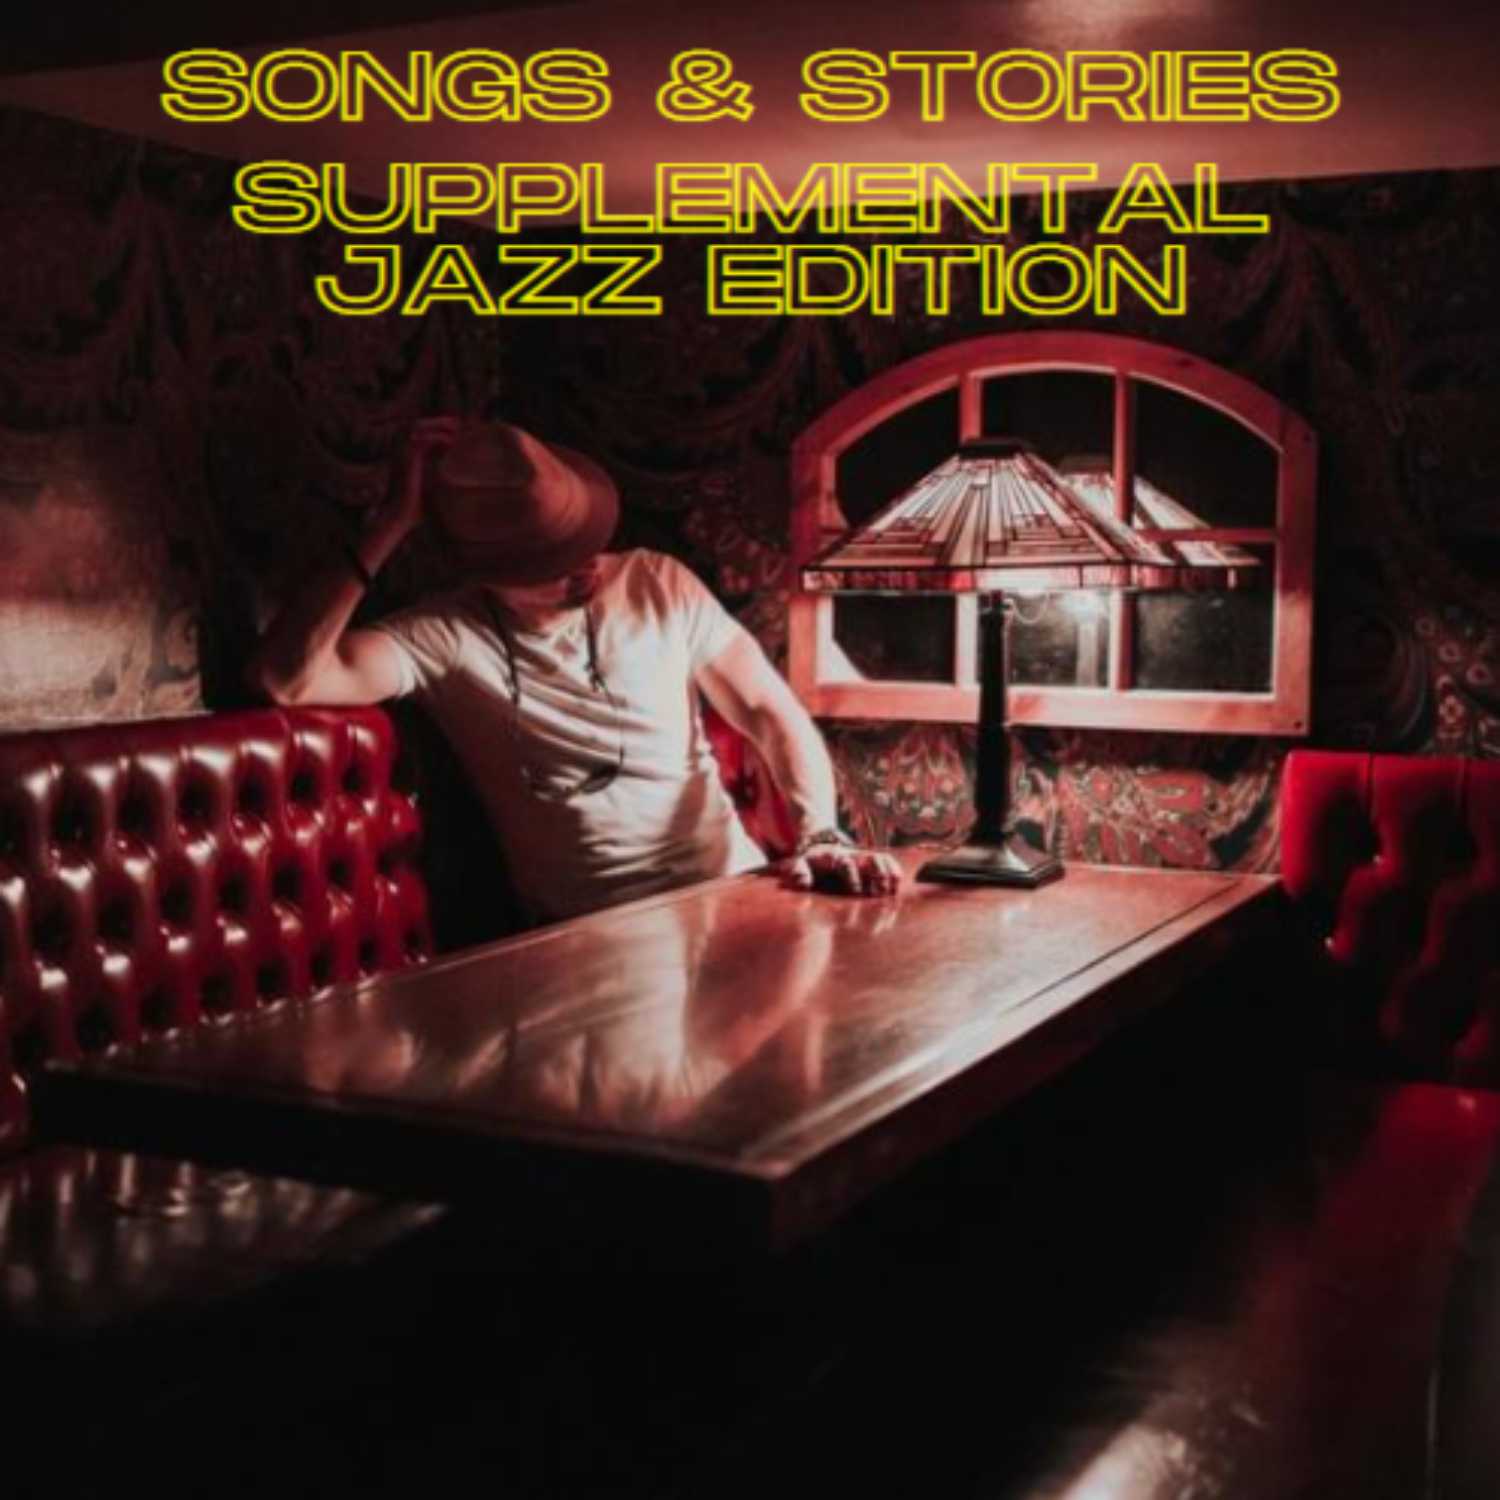 Songs & Stories Supplemental Jazz Edition